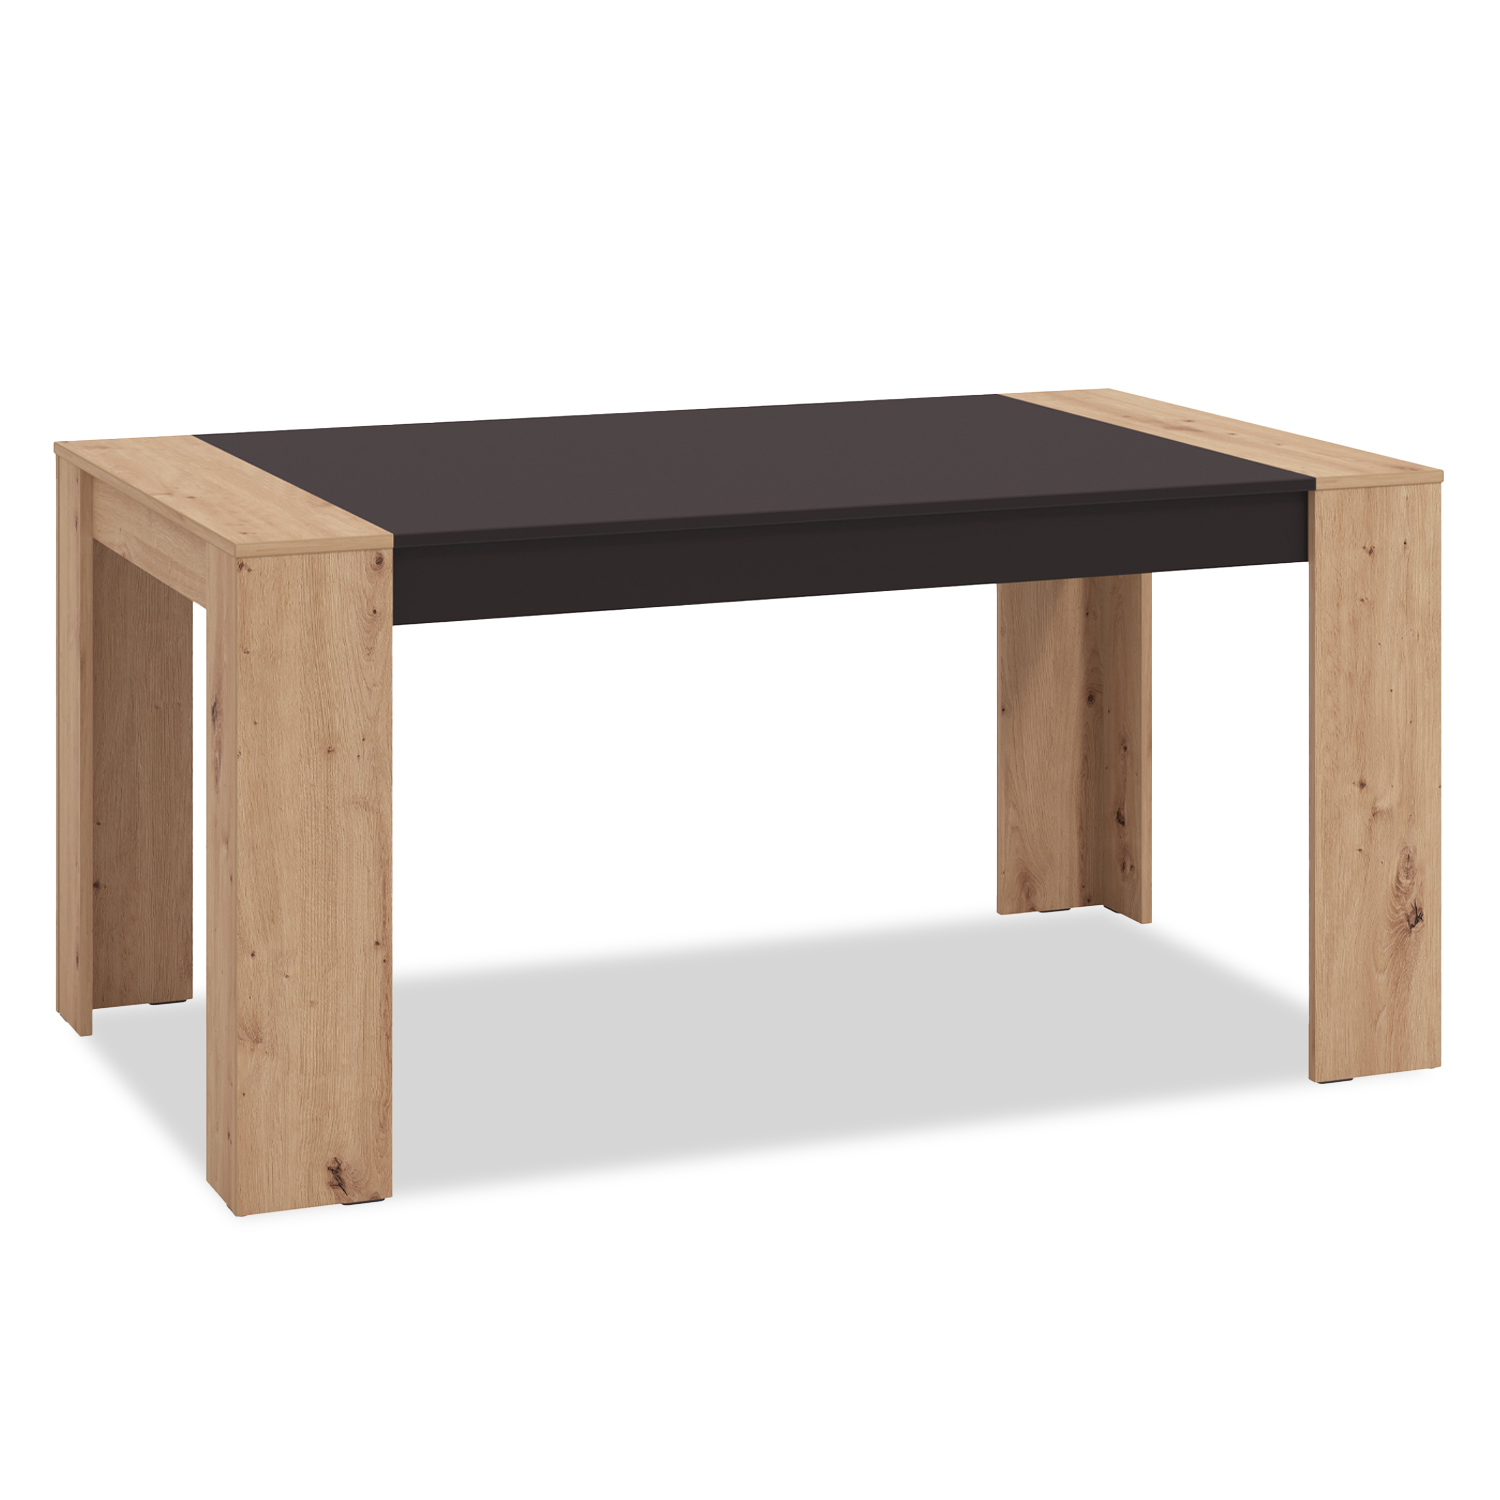 Modern Dining Table 154x90 cm Kitchen Table Wooden Table Oak Black 6 Seater